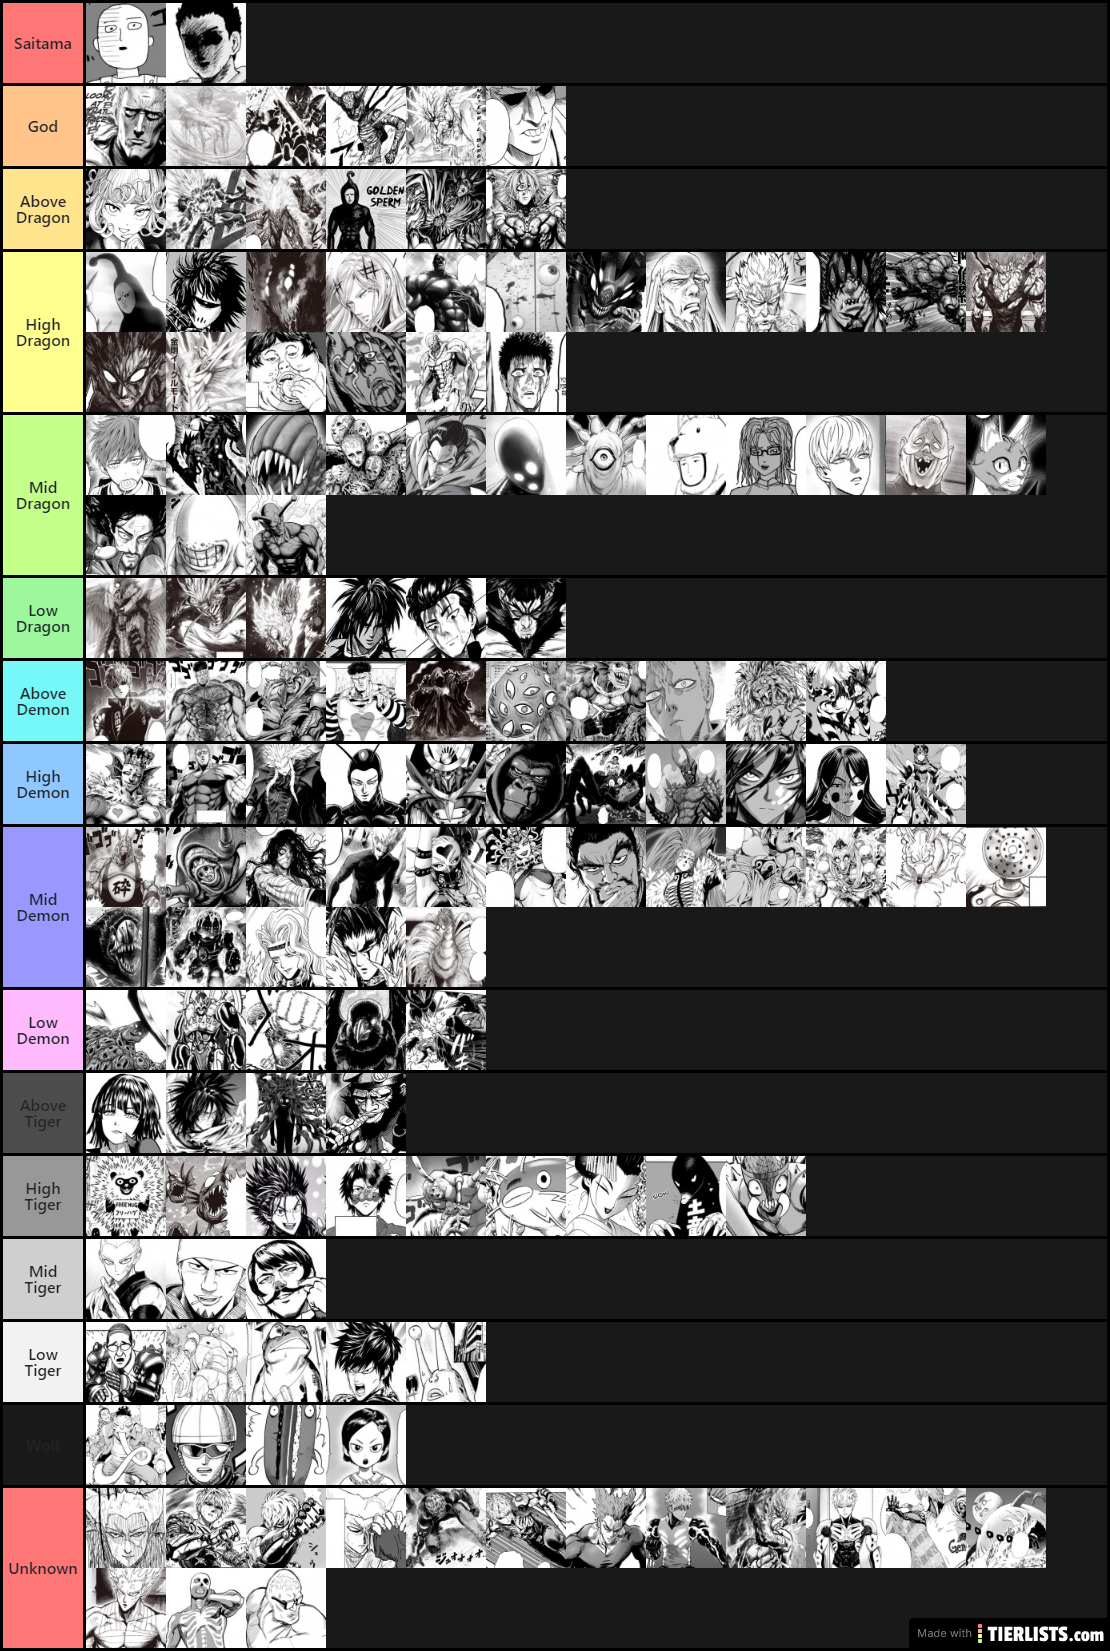 OPM Power scale Tier List (my opinoin)